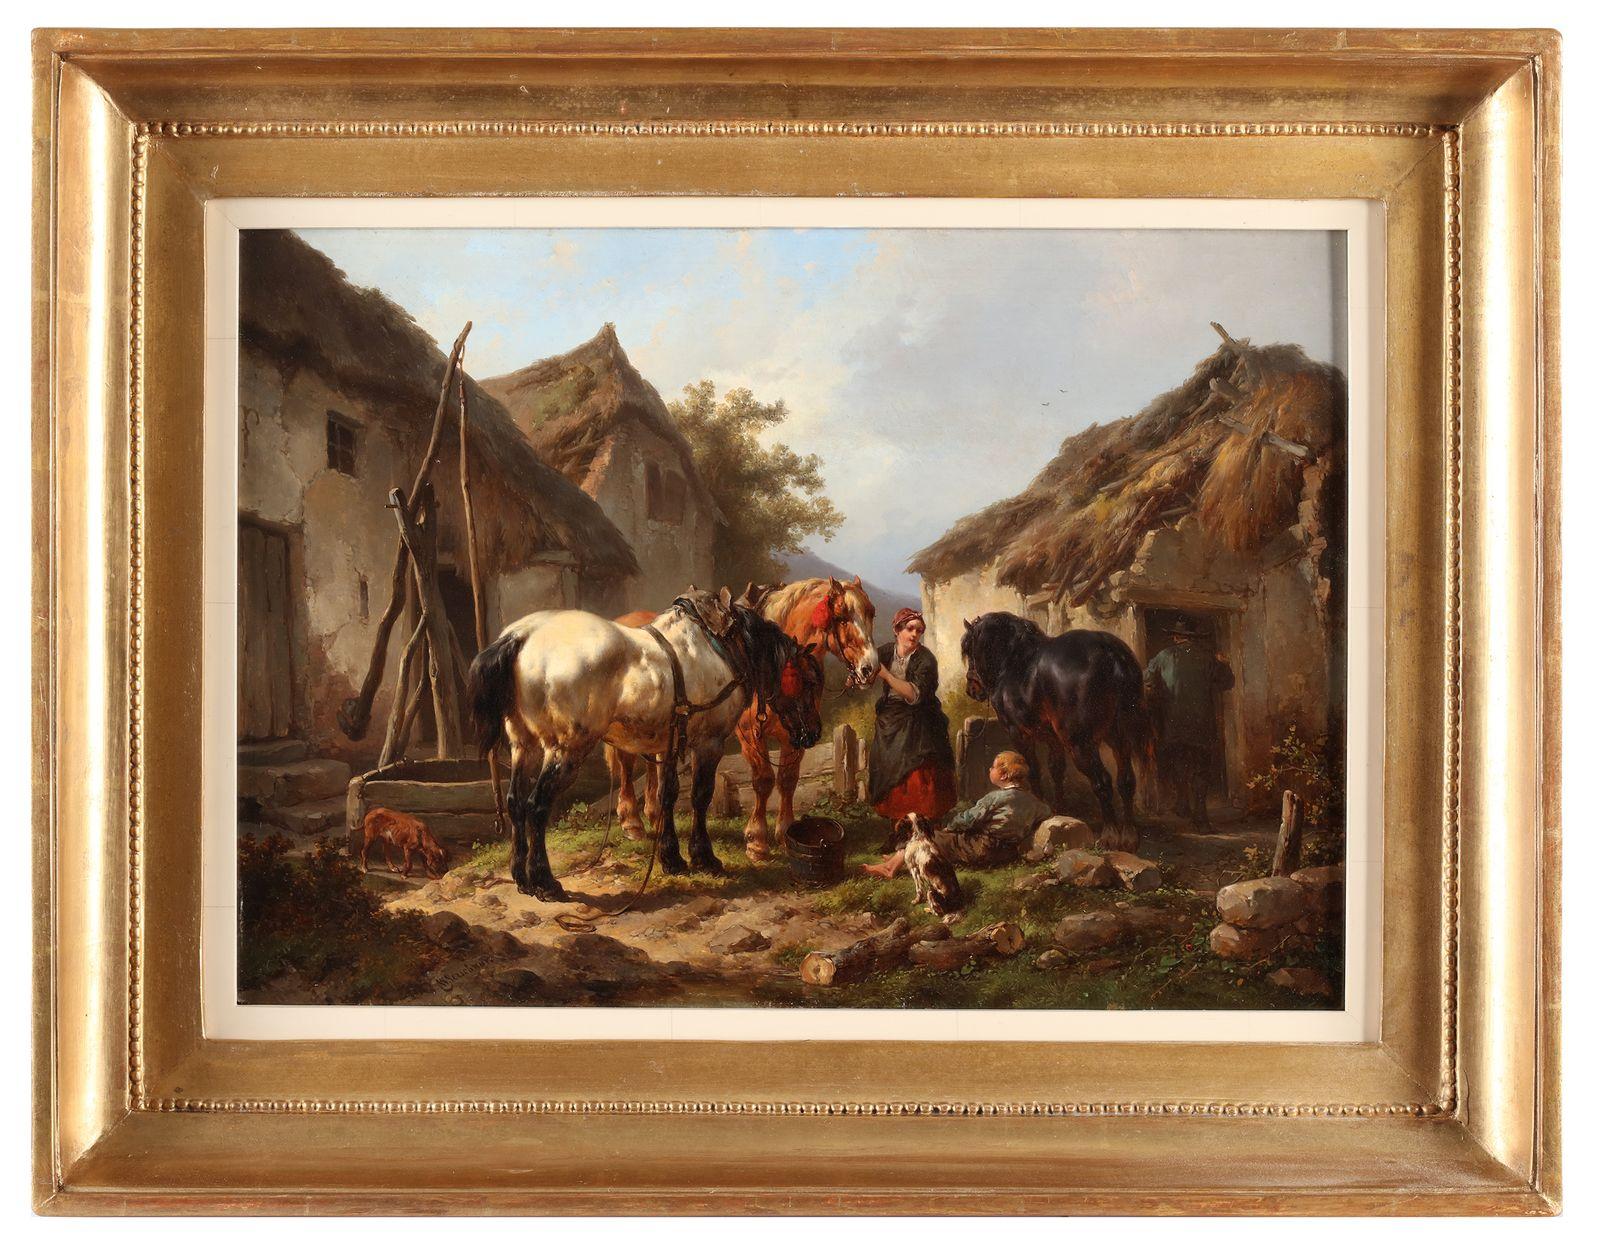 Tending the horses - Romantic Painting by Wouterus Verschuur l